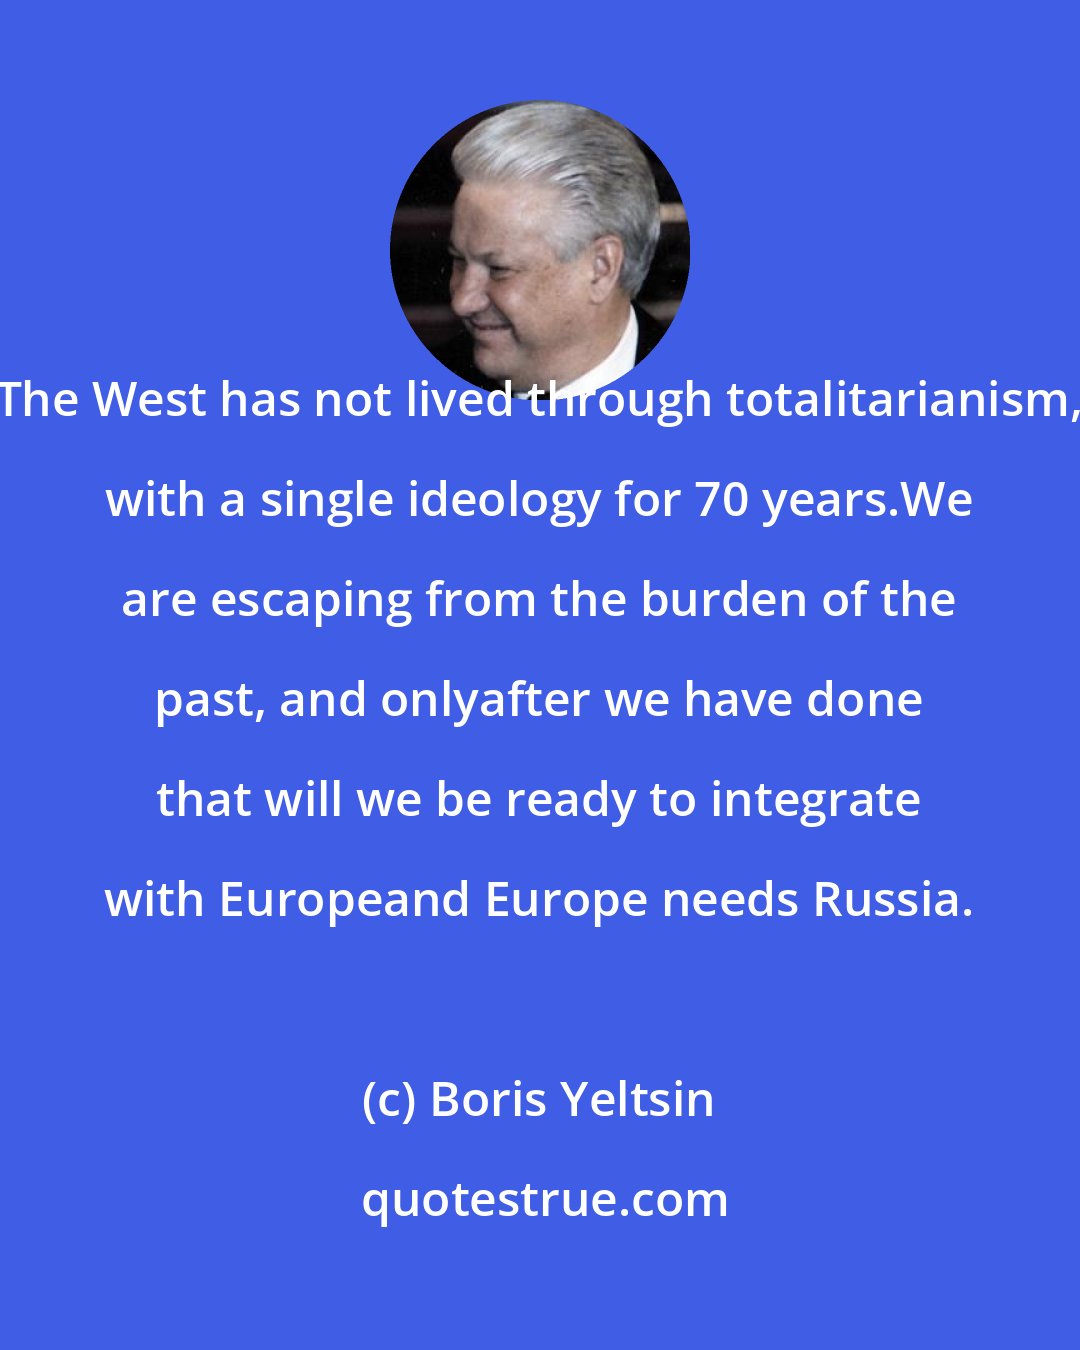 Boris Yeltsin: The West has not lived through totalitarianism, with a single ideology for 70 years.We are escaping from the burden of the past, and onlyafter we have done that will we be ready to integrate with Europeand Europe needs Russia.